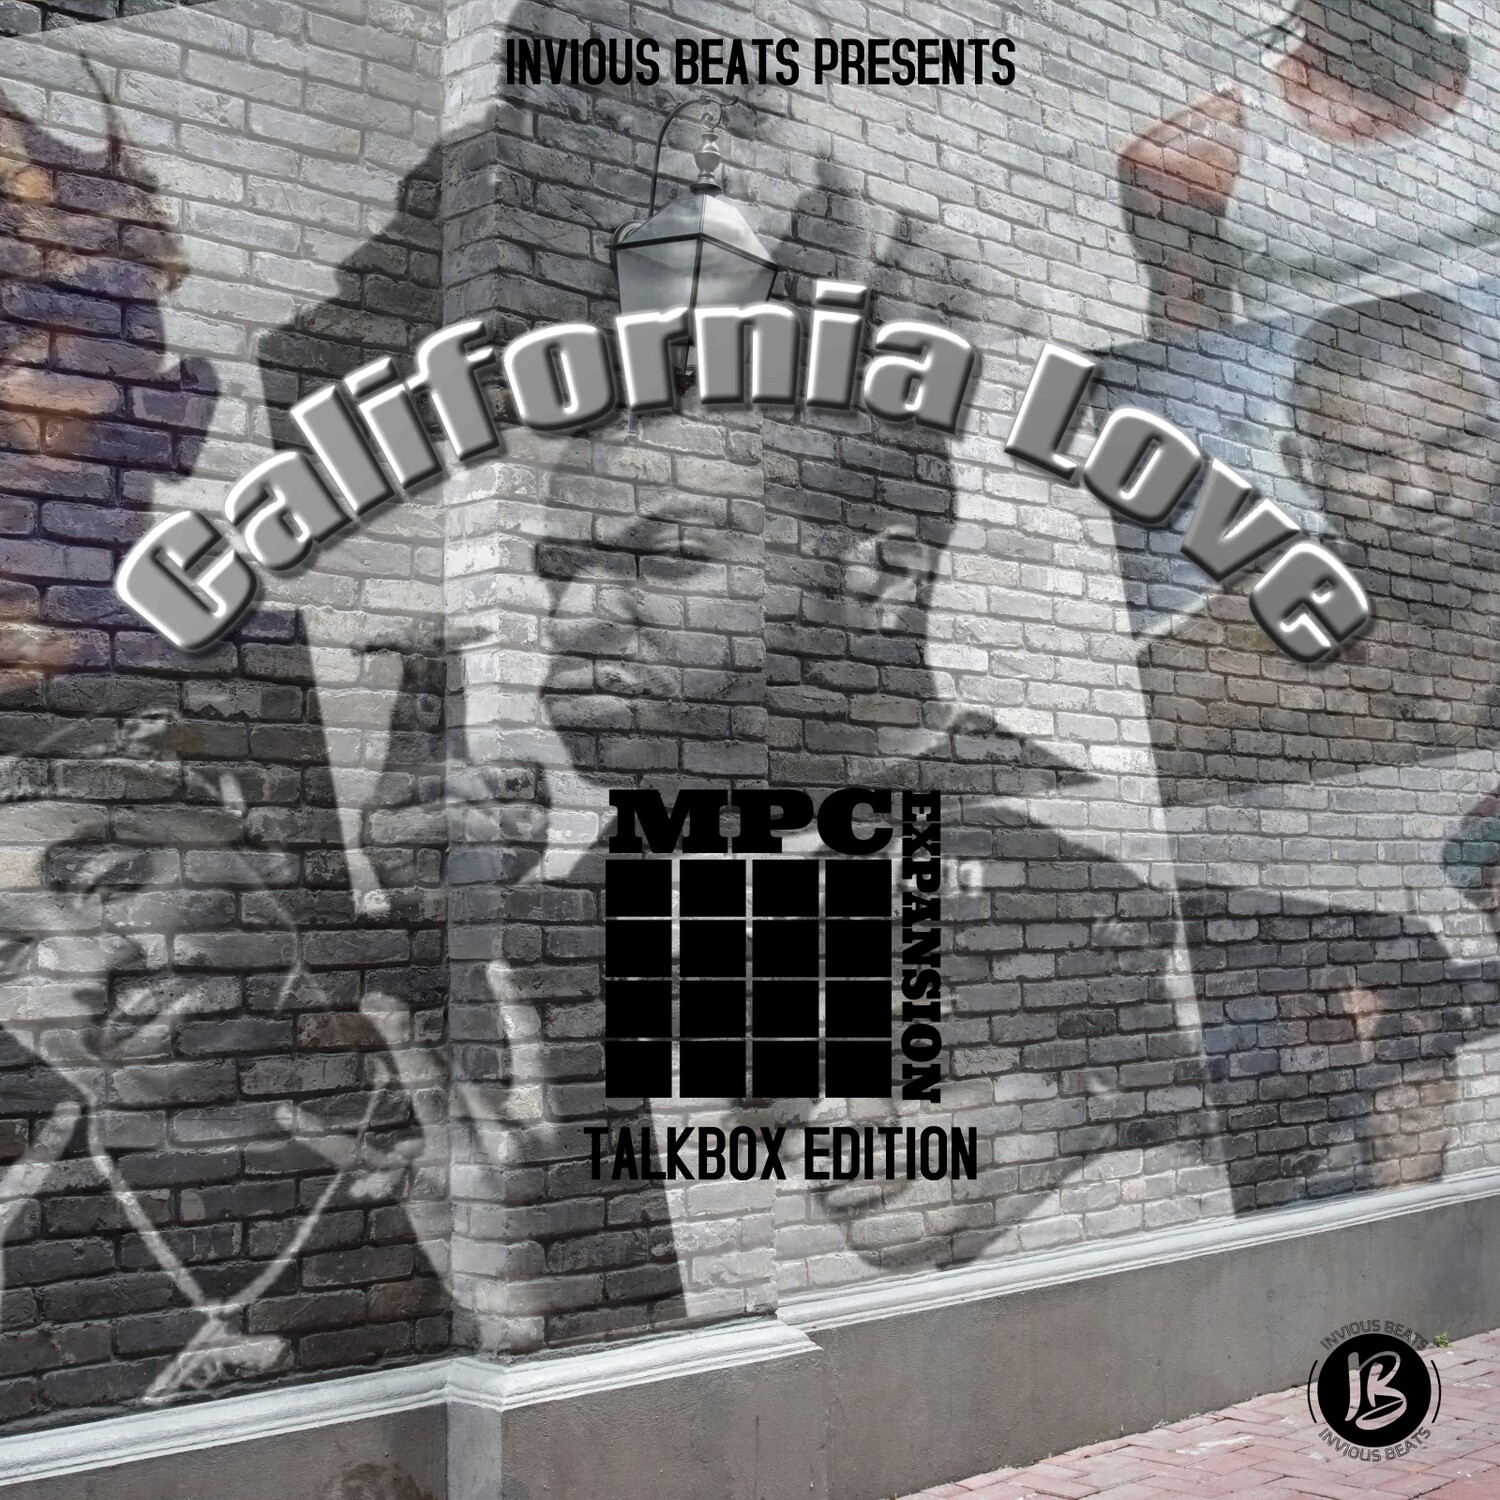 MPC EXPANSION ‘CALIFORNIA LOVE’ by INVIOUS